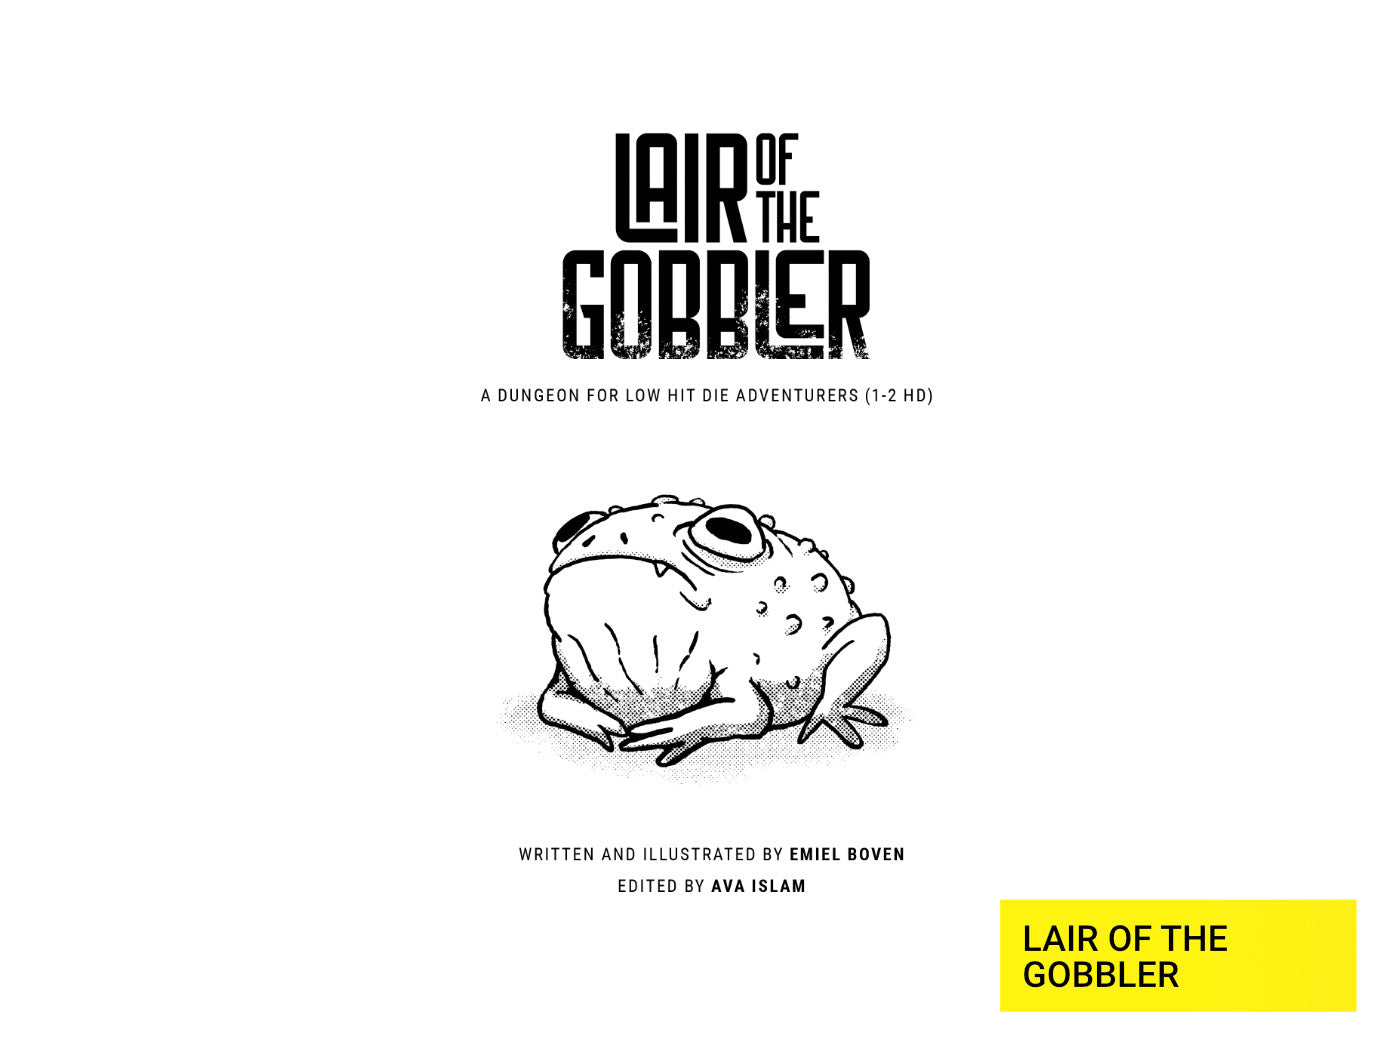 The Lair of the Gobbler adventure for DURF by Emiel Boven